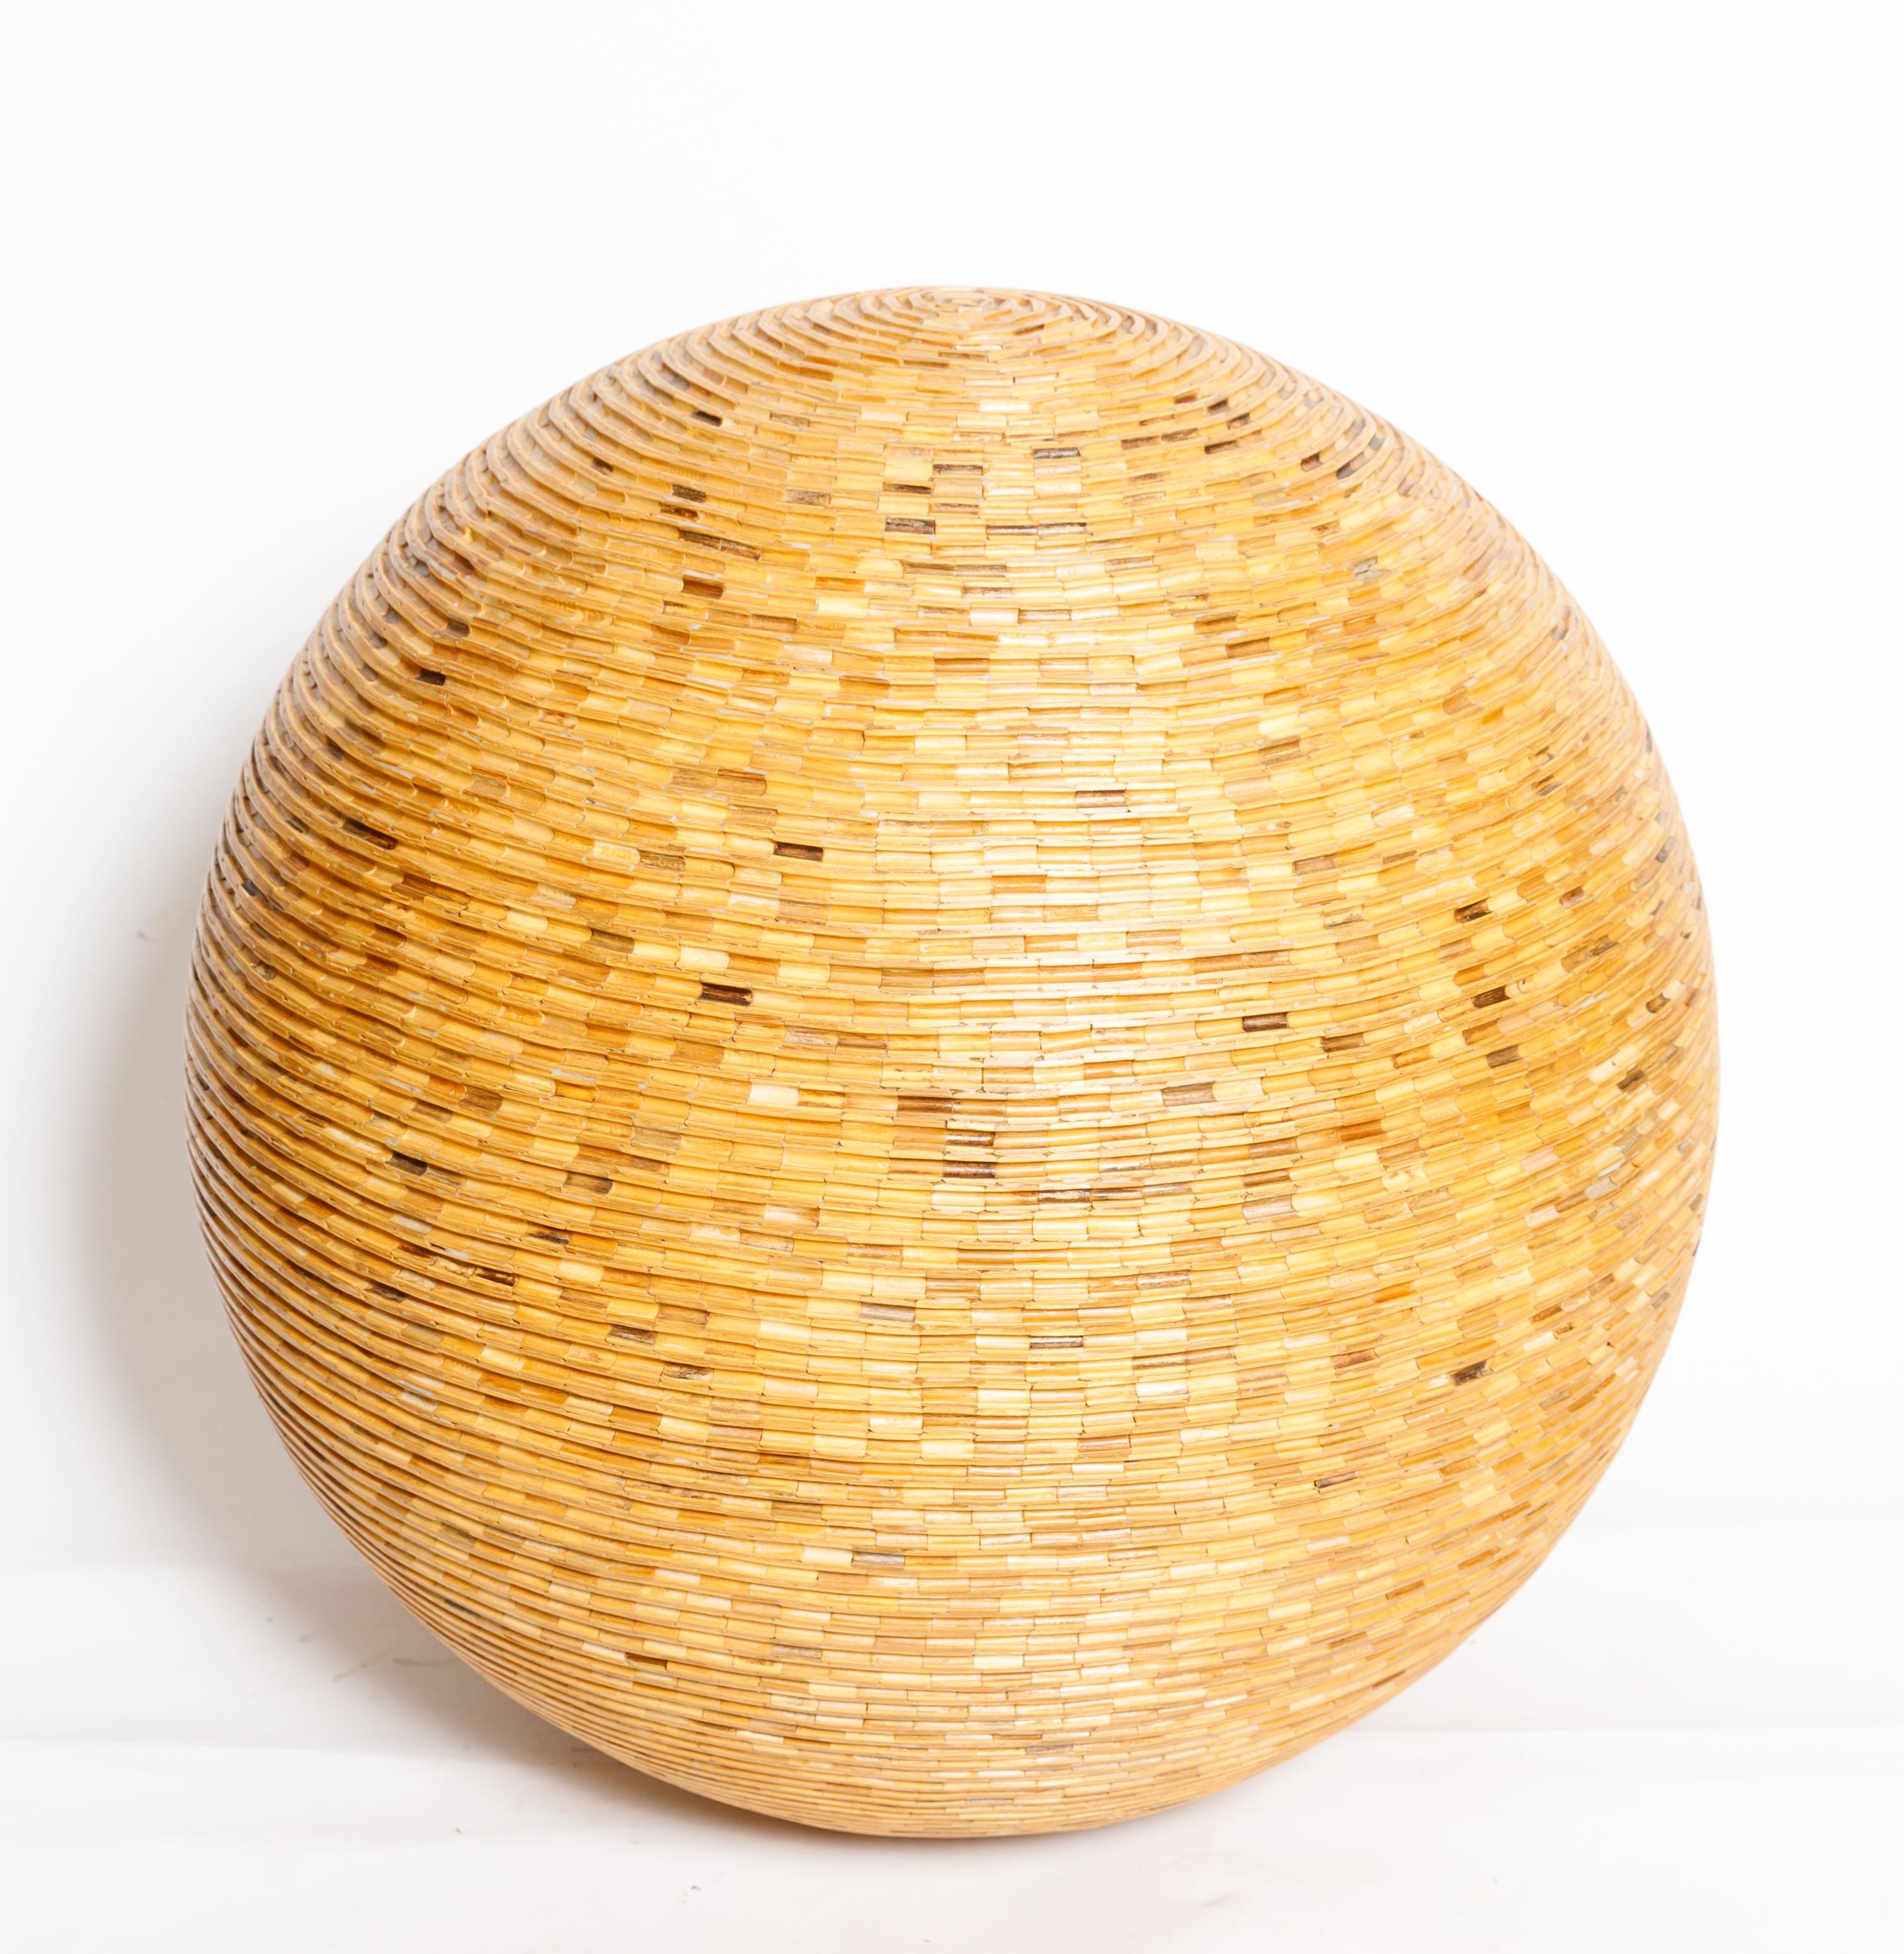 Large sculptural sphere made of wooden pieces.